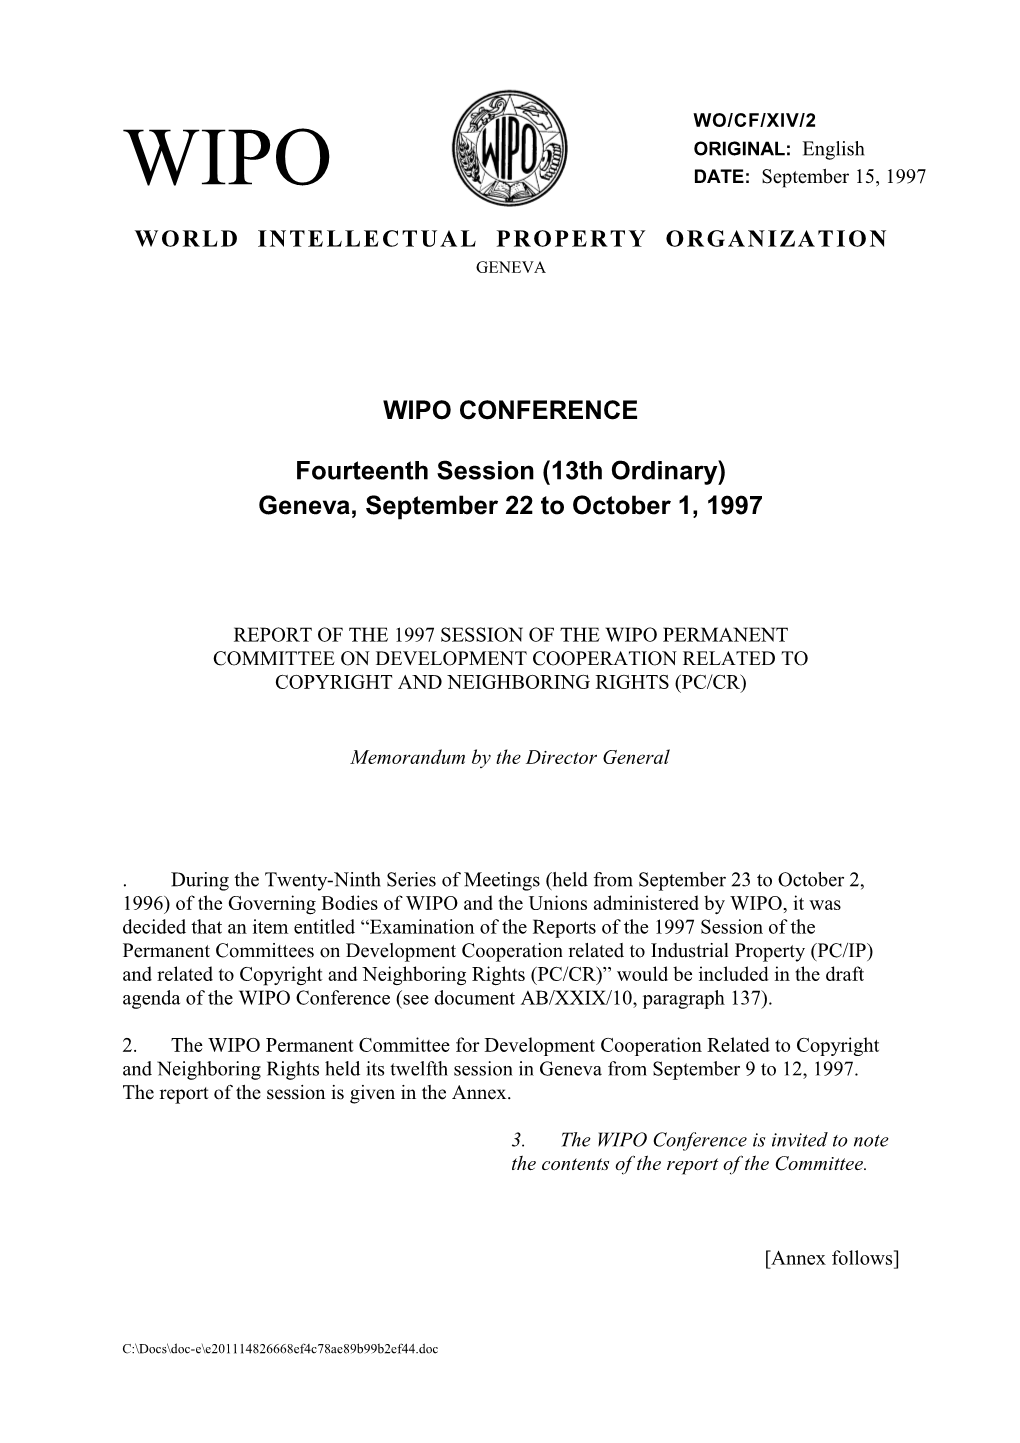 WO/CF/XIV/2: Report of the 1997 Session of the WIPO Permanent Committee on Development